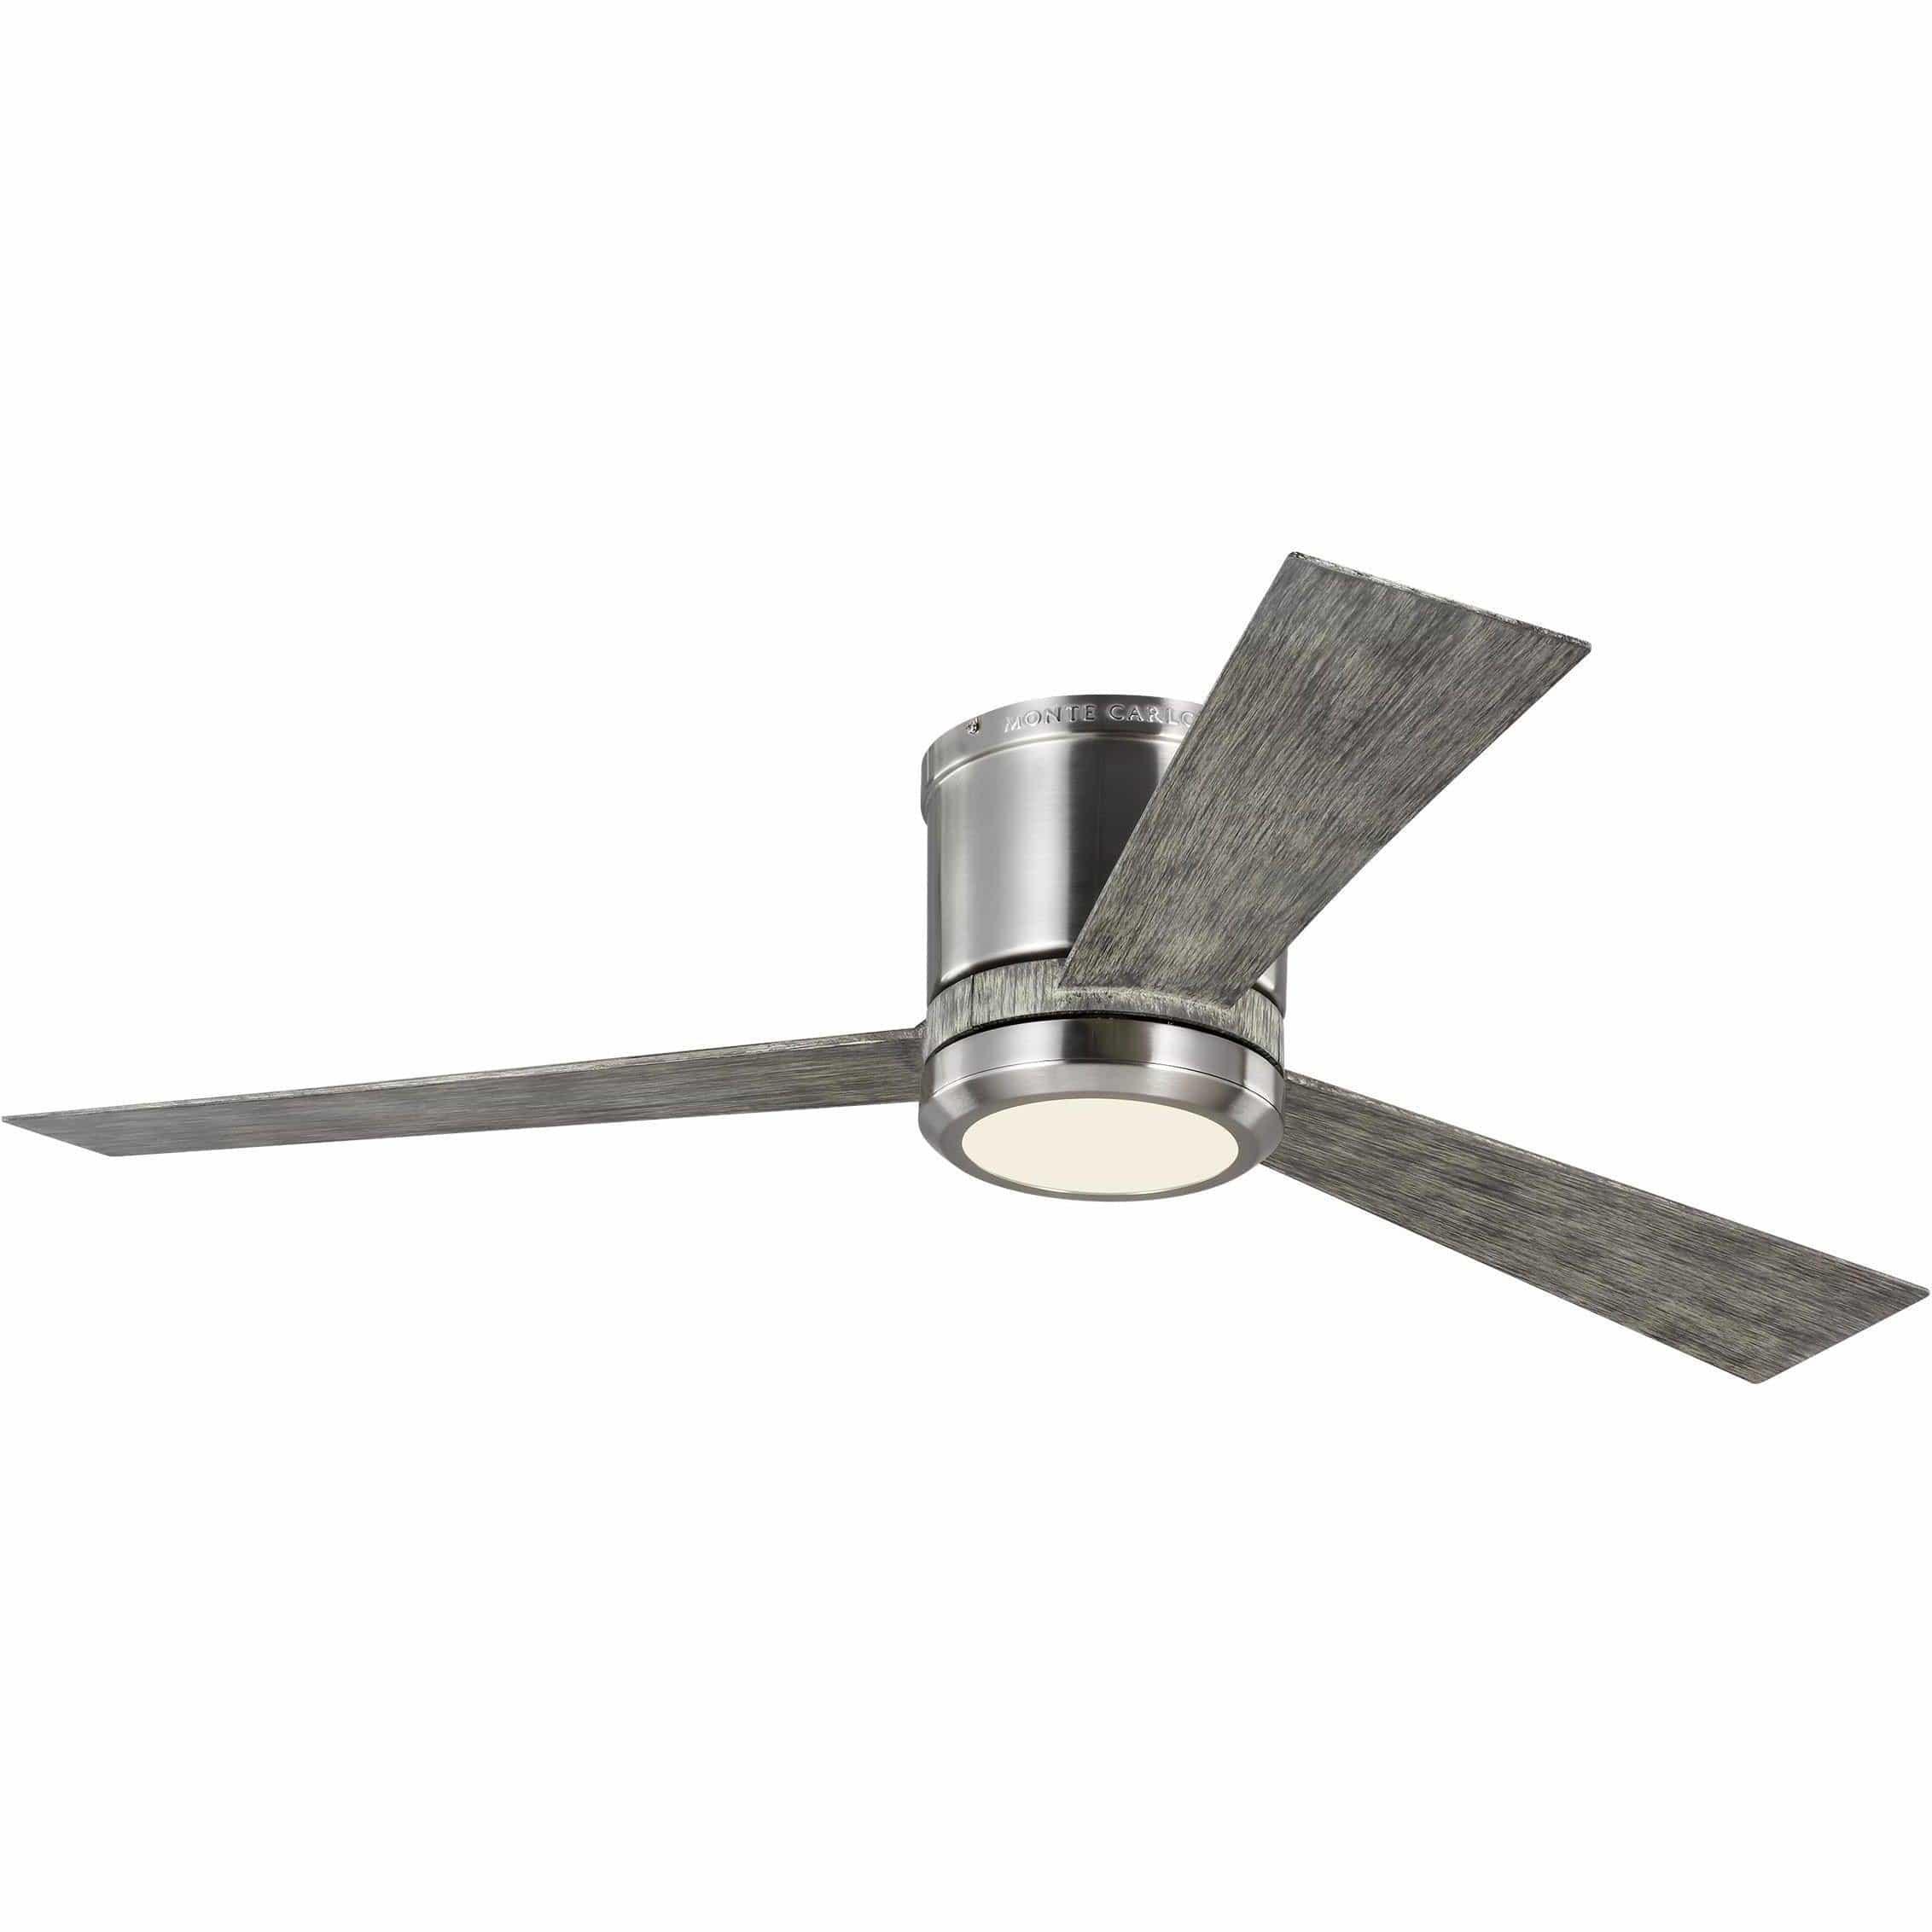 Visual Comfort Fan Collection - Clarity 52" Ceiling Fan - 3CLYR52BSLGD-V1 | Montreal Lighting & Hardware